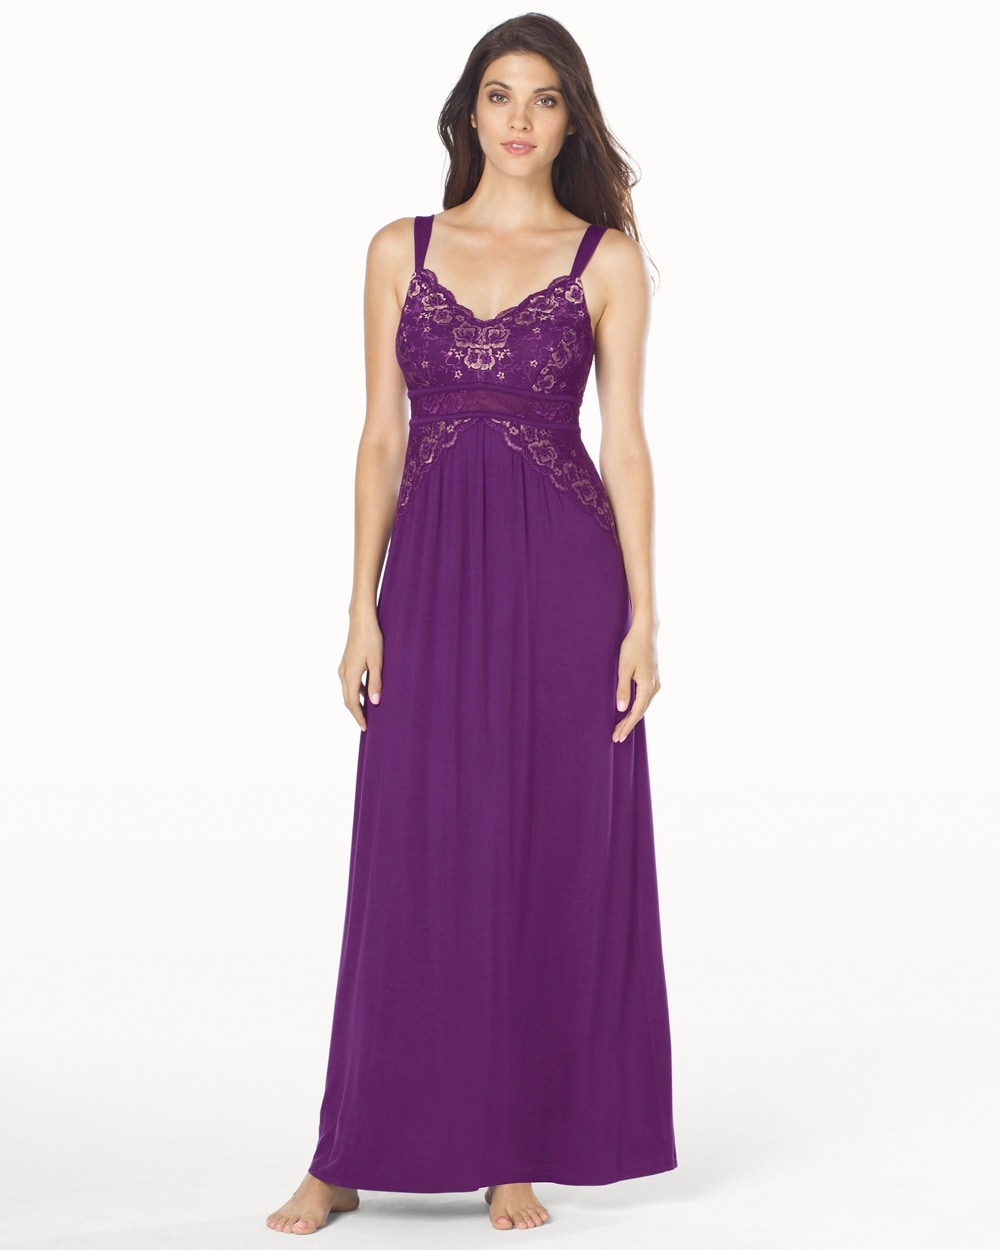 Limited Edition Floral Noir Nightgown Majestic Plum With Soft Tan